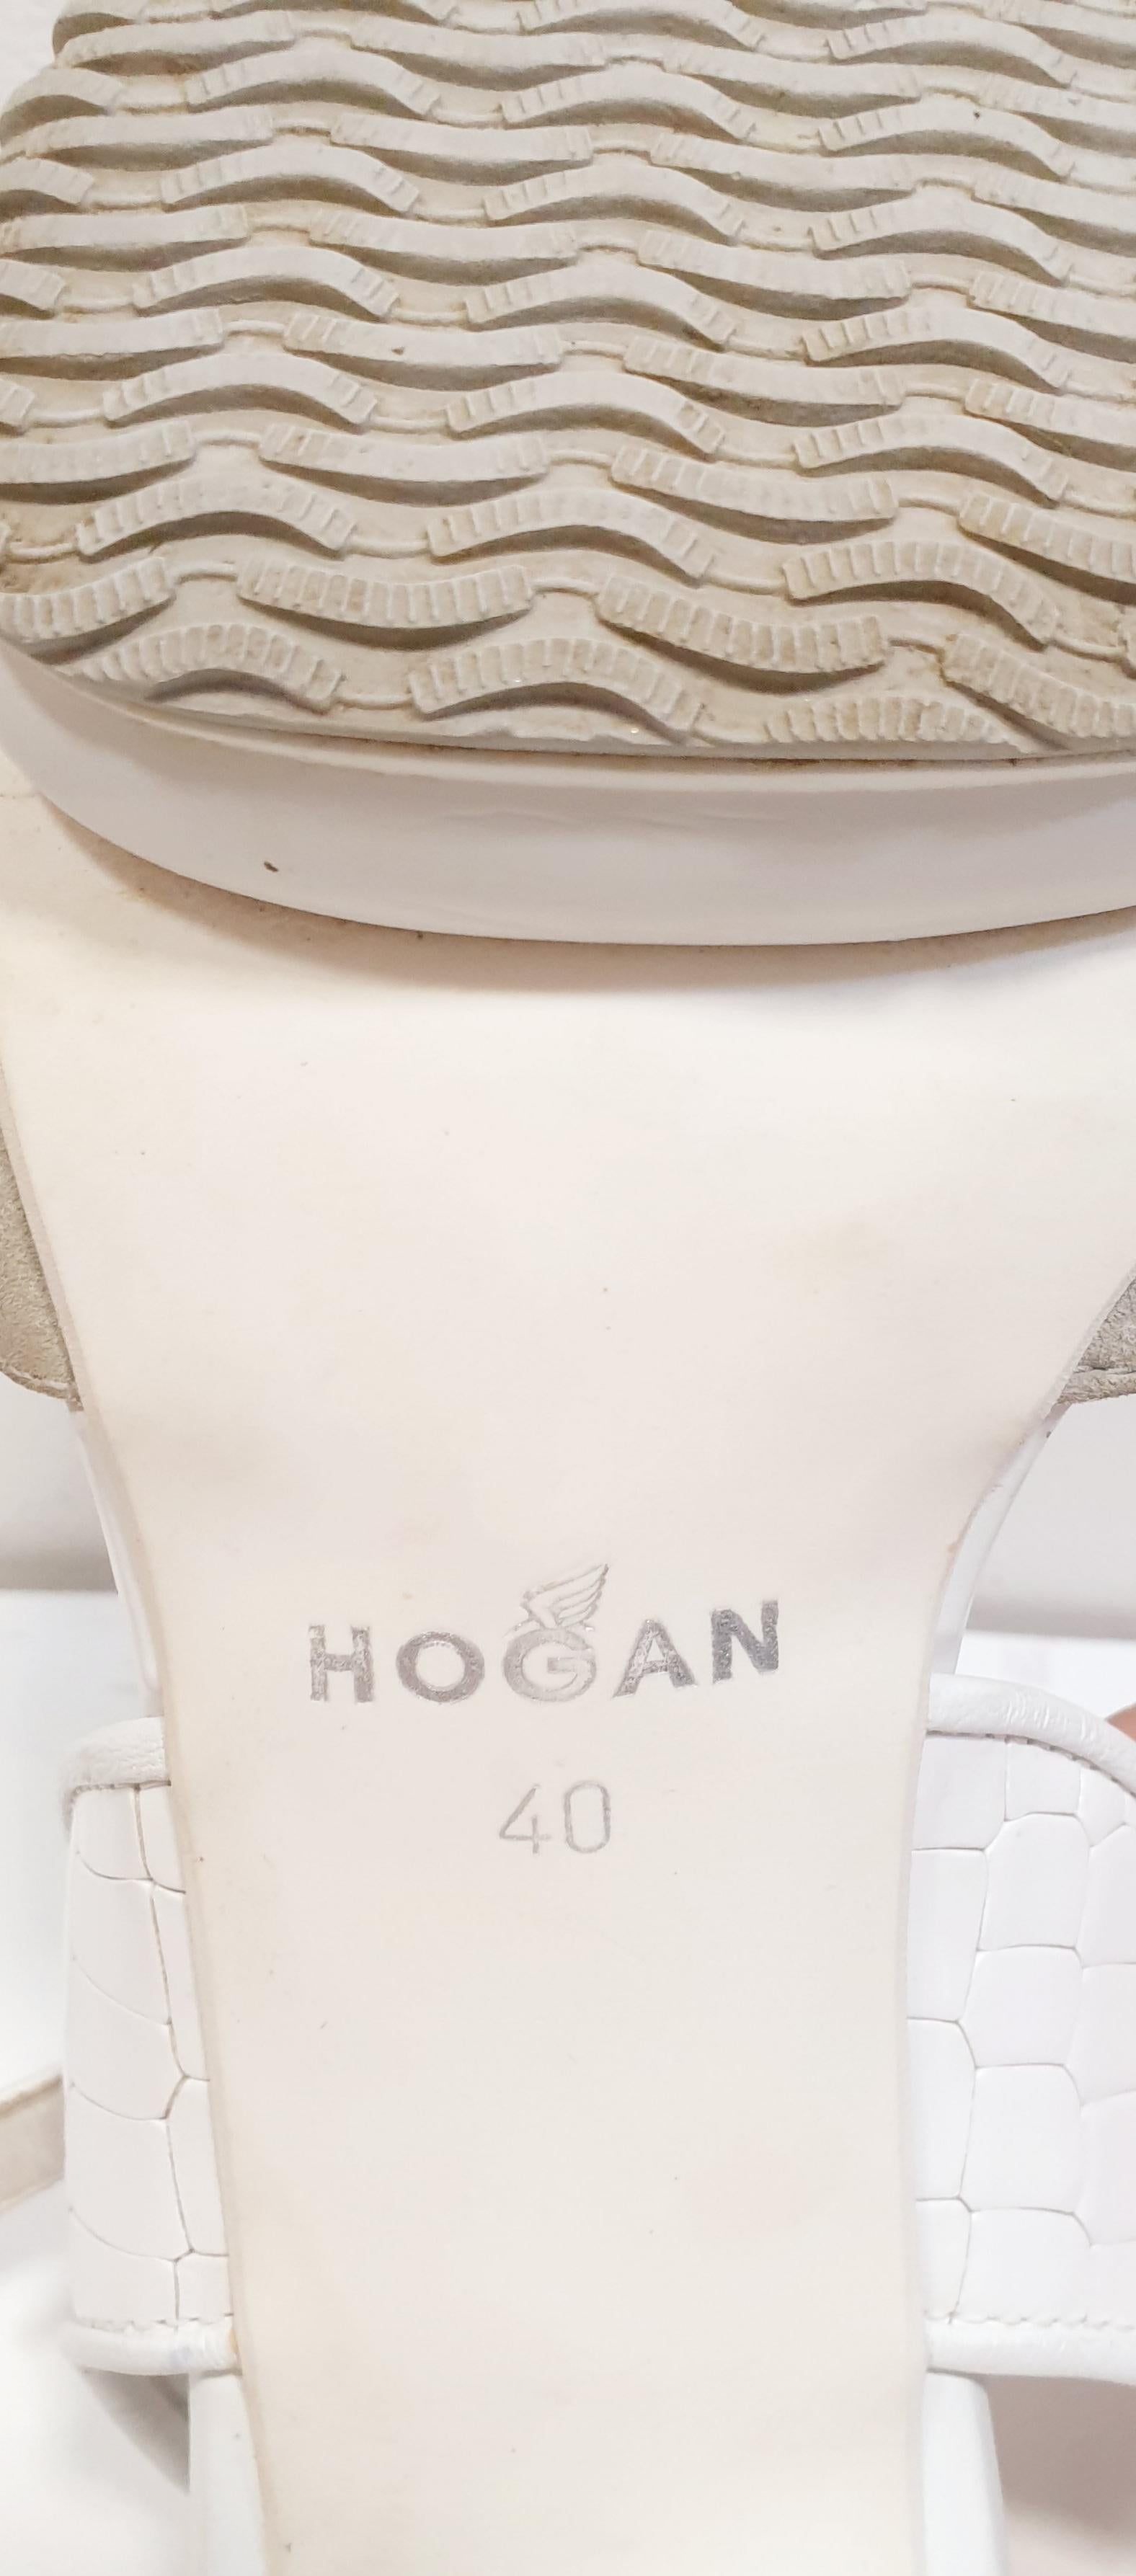 Hogan Leather and Suede White Sandals For Sale 2